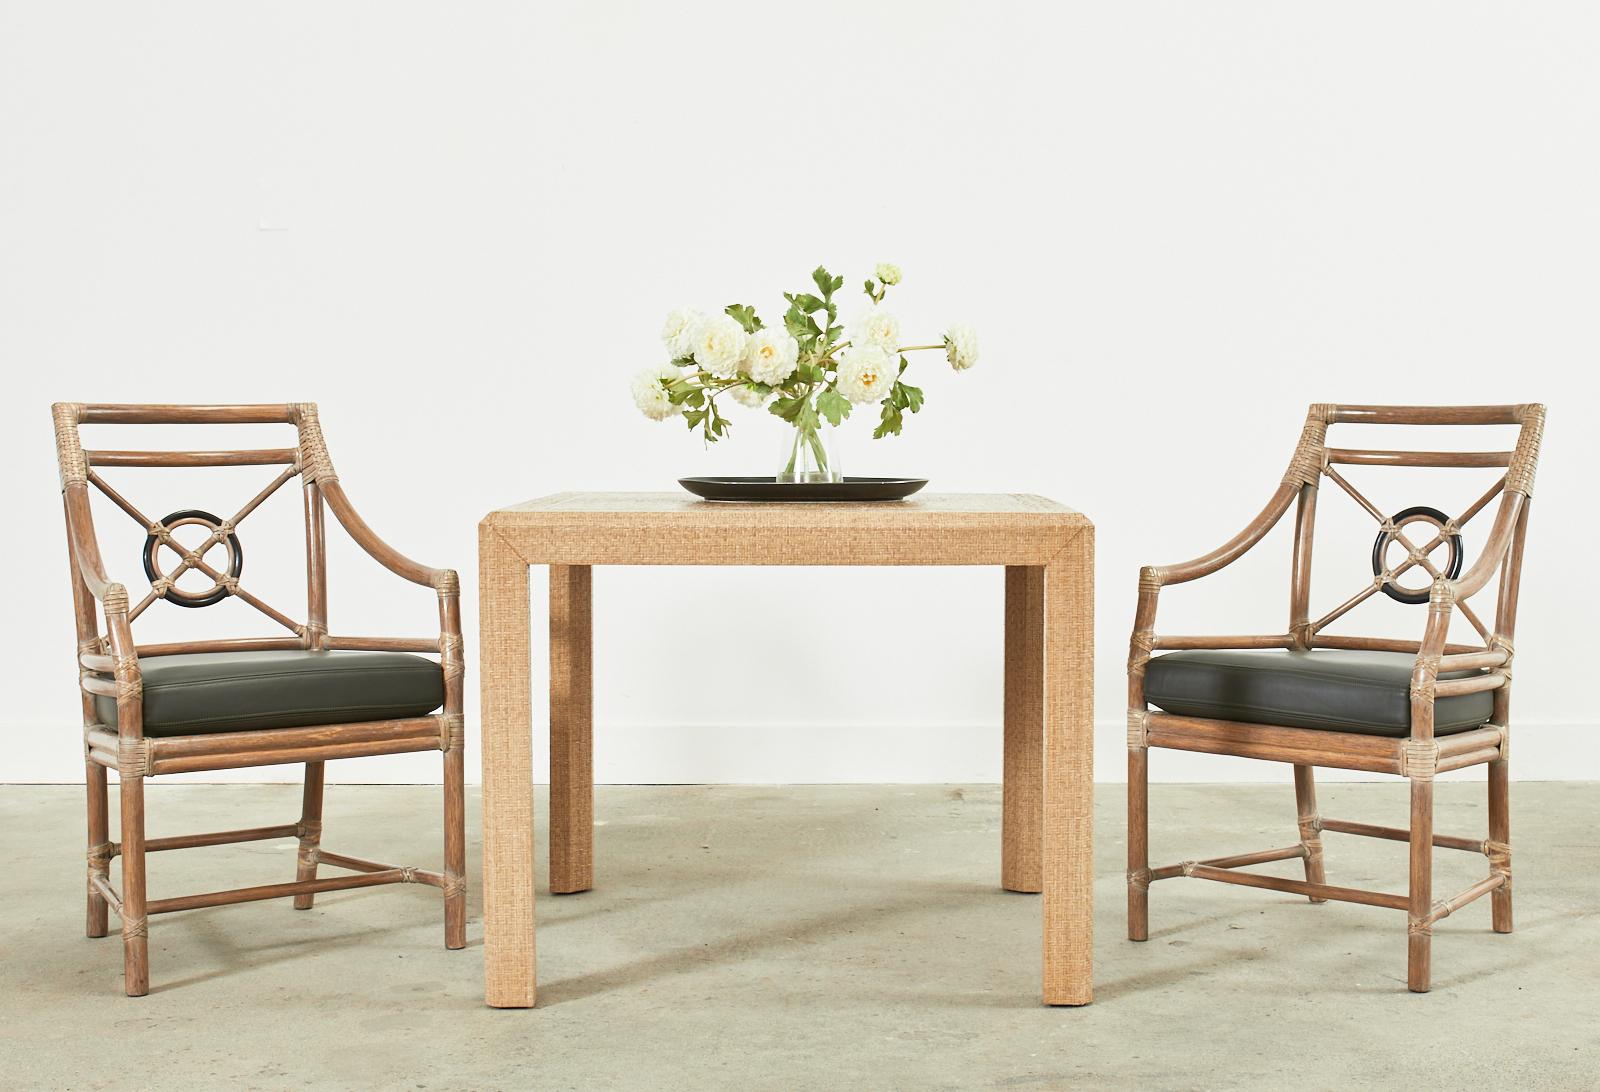 Iconic set of eight McGuire organic modern rattan target dining chairs designed by Elinor McGuire. The set consists of four host armchairs and four side chairs measuring 20 inches wide. Model numbers MCM59 and MCM60 crafted from rattan poles with a